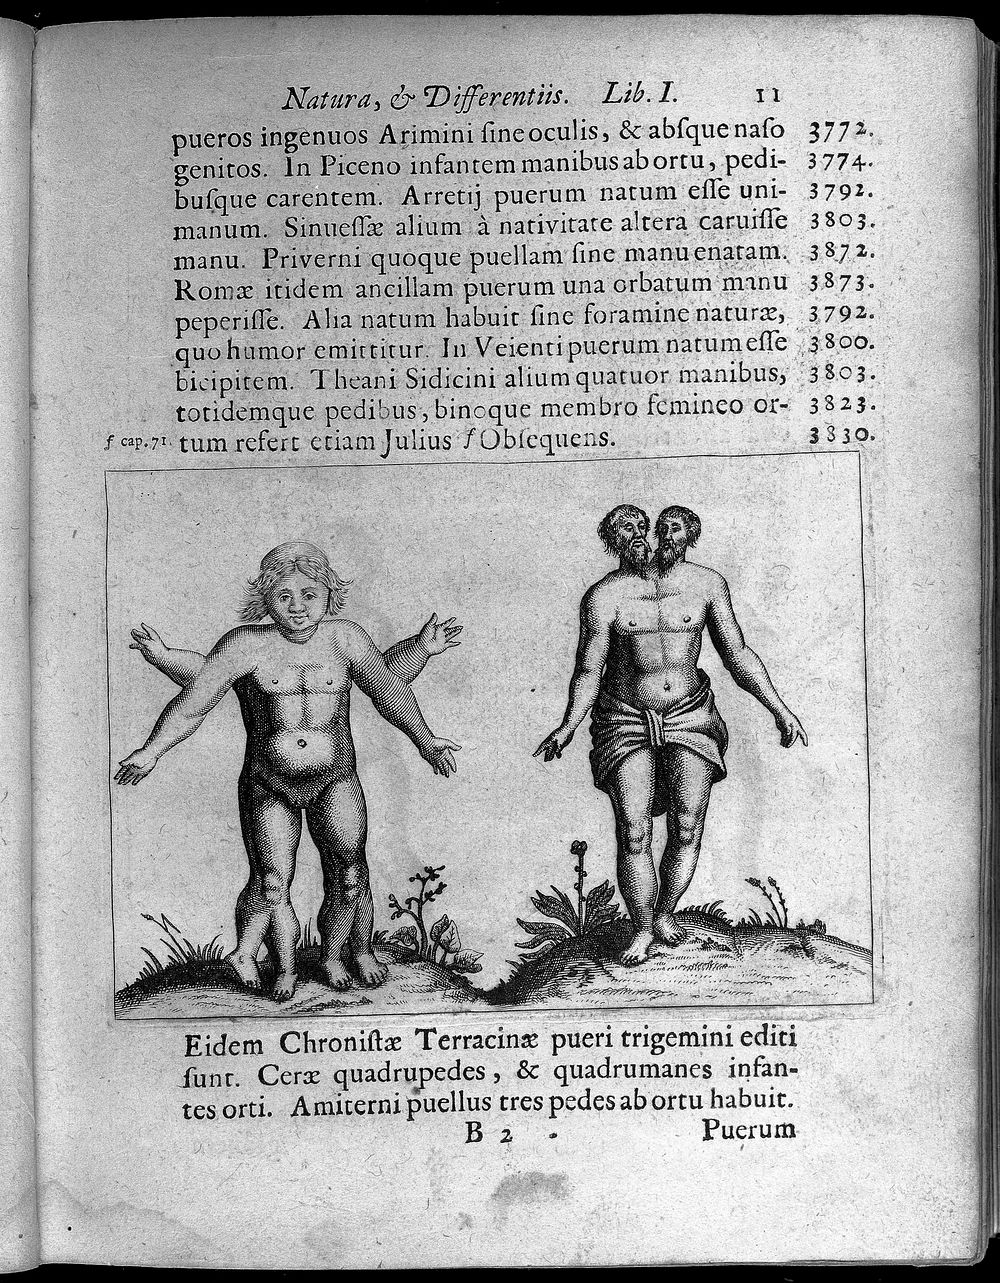 Two human figures with abnormalities, one with two sets of arms and legs and the other with two heads